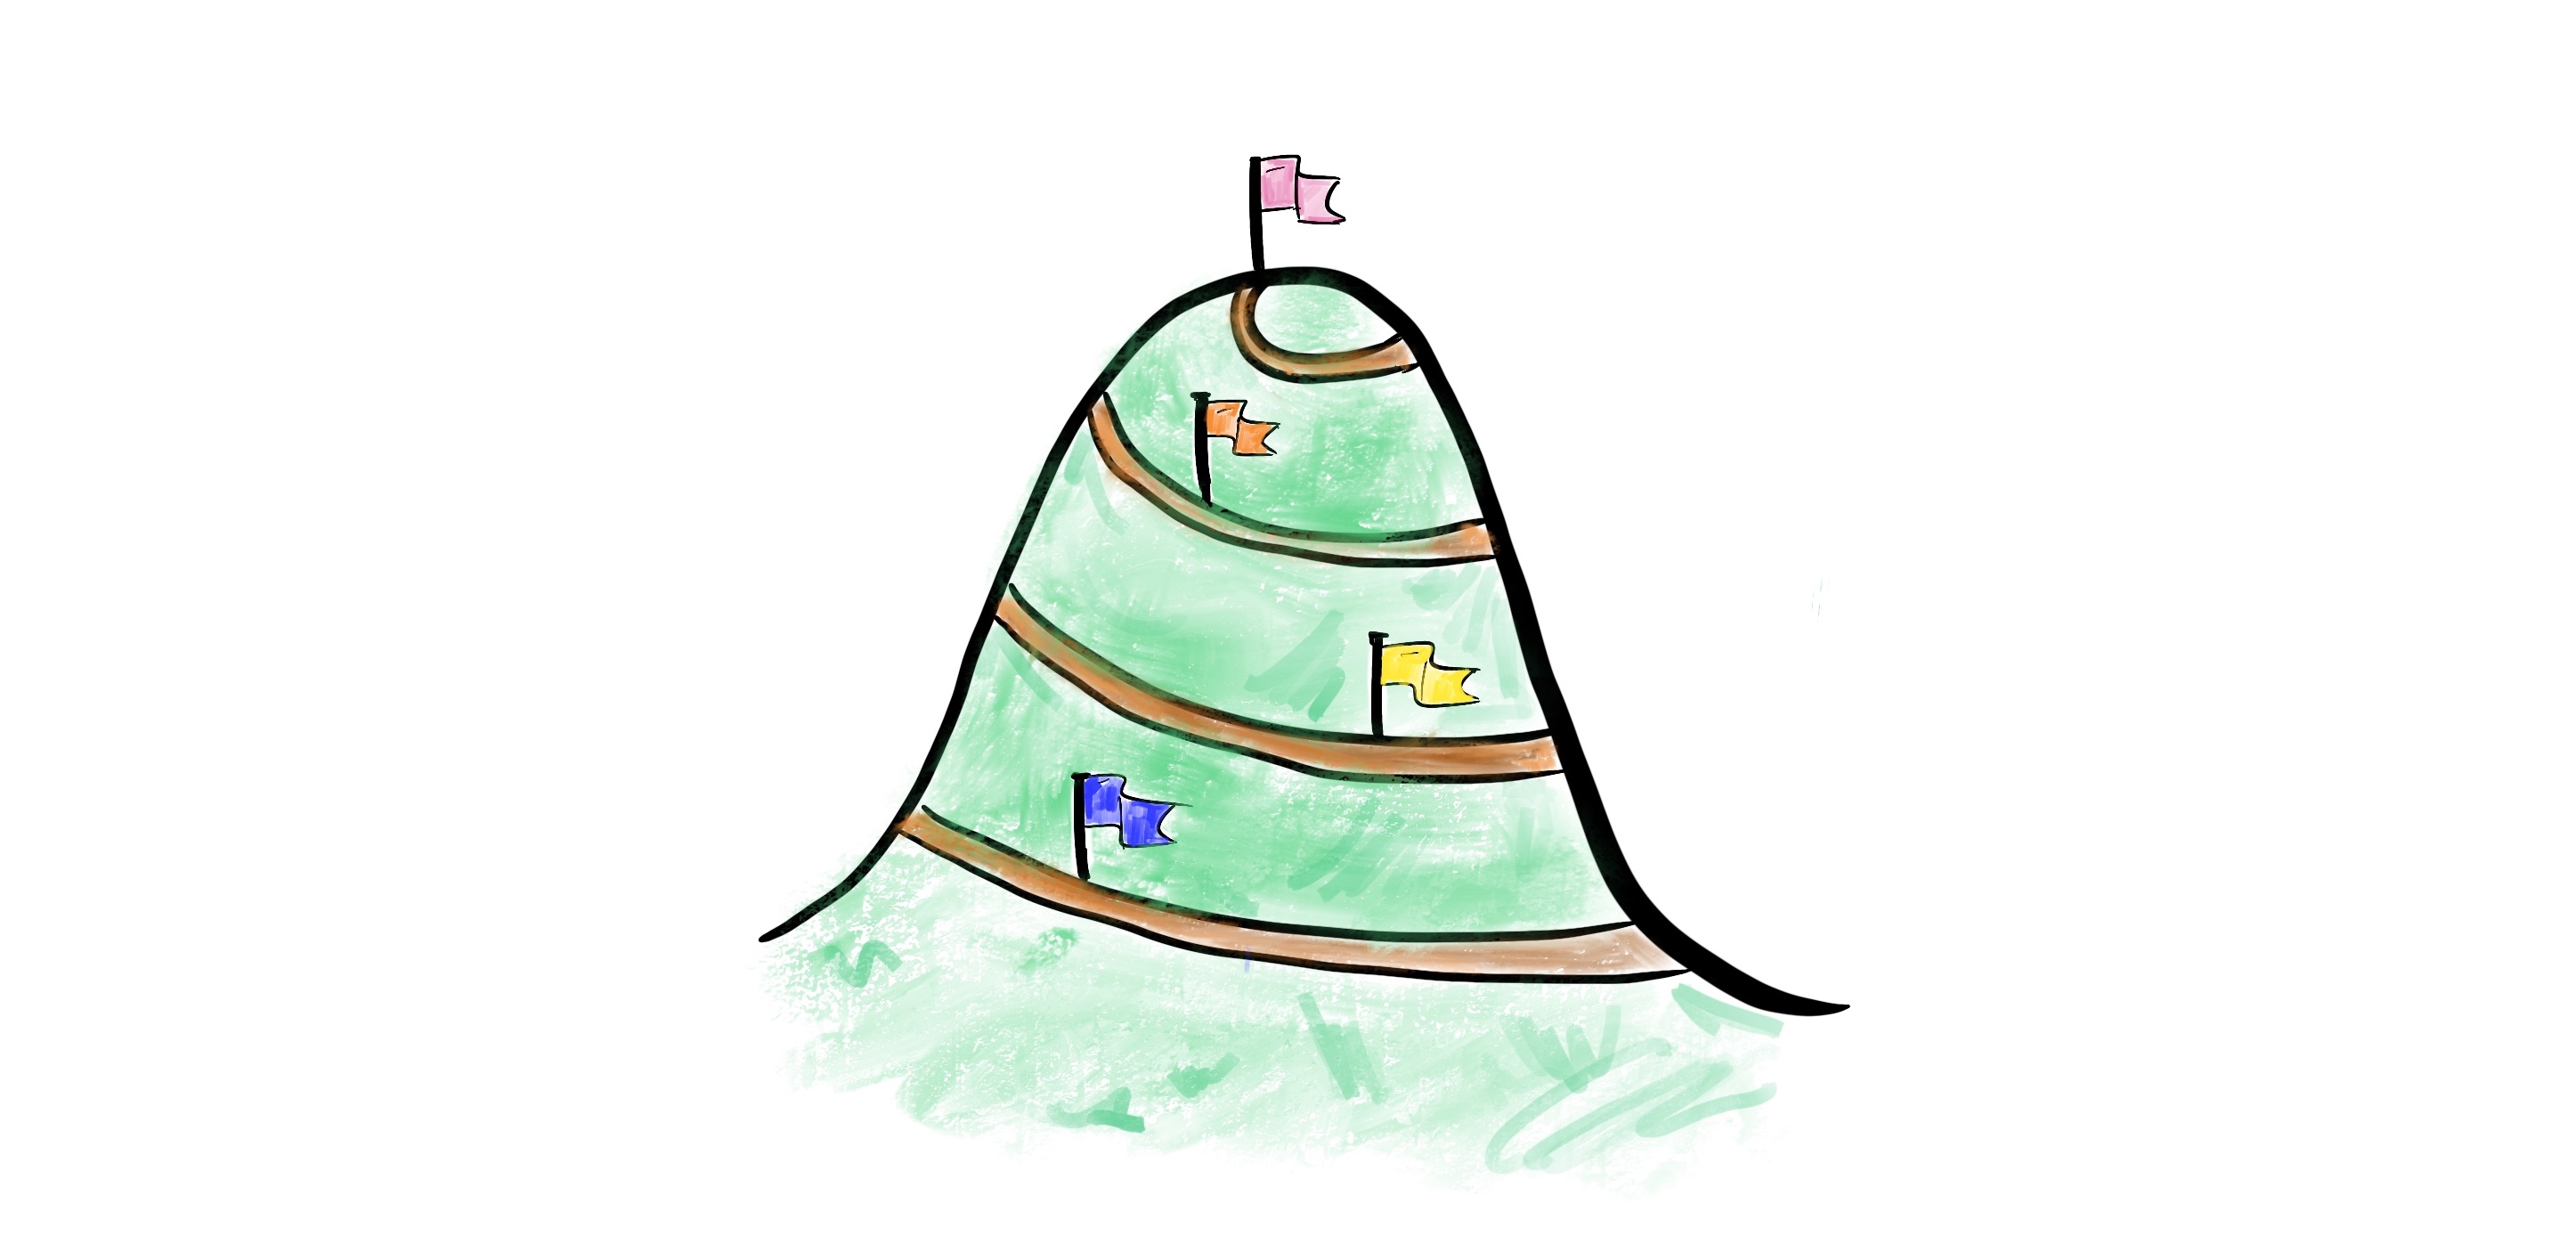 The hill and the flags of improving.